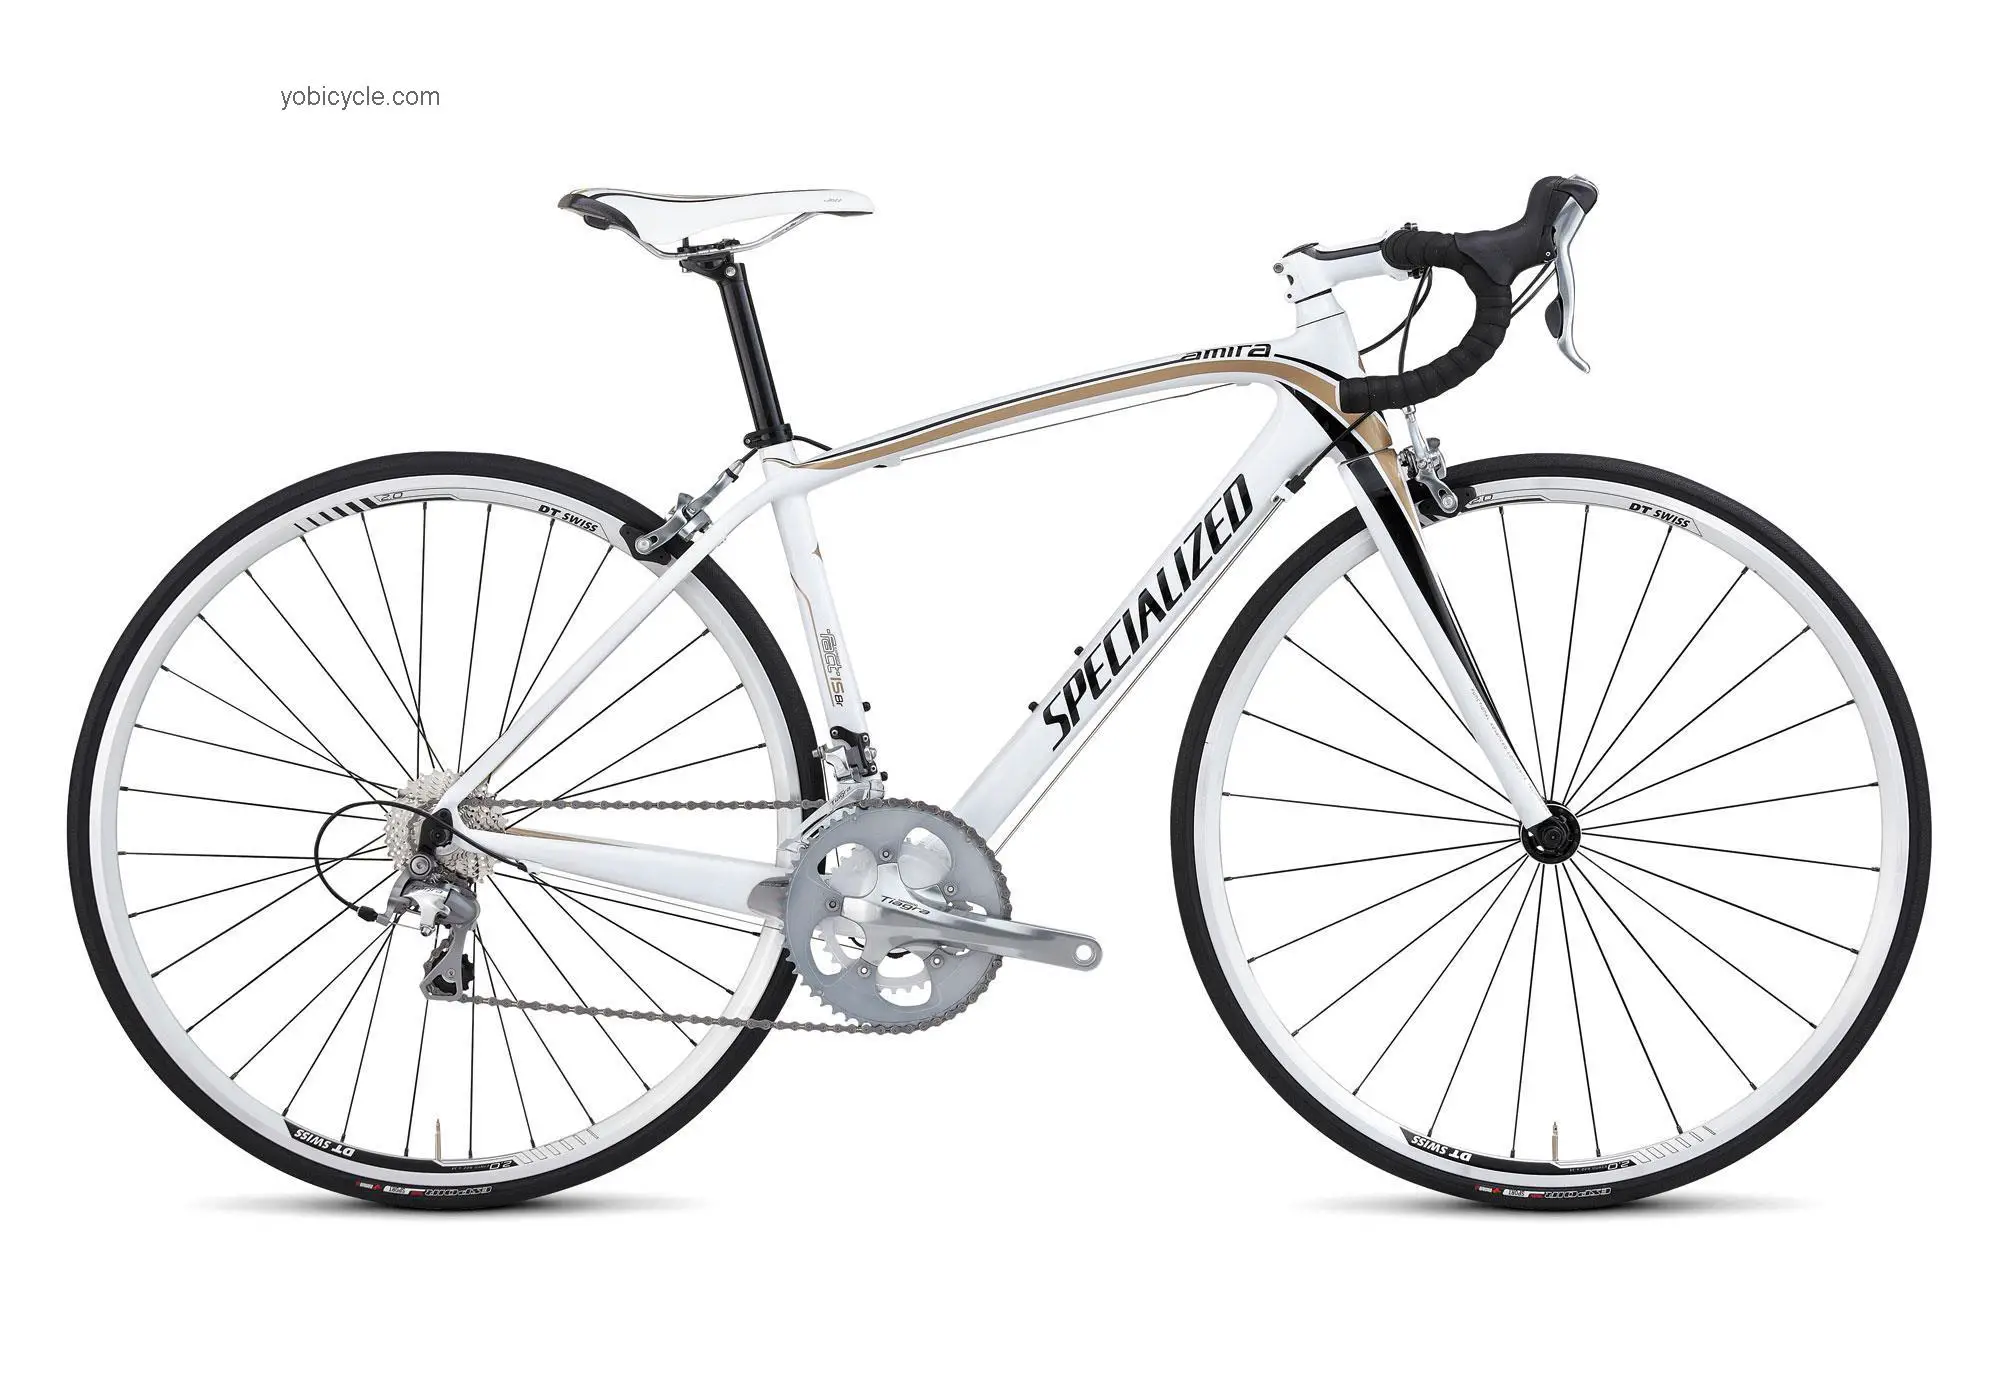 Specialized Amira Compact 2012 comparison online with competitors